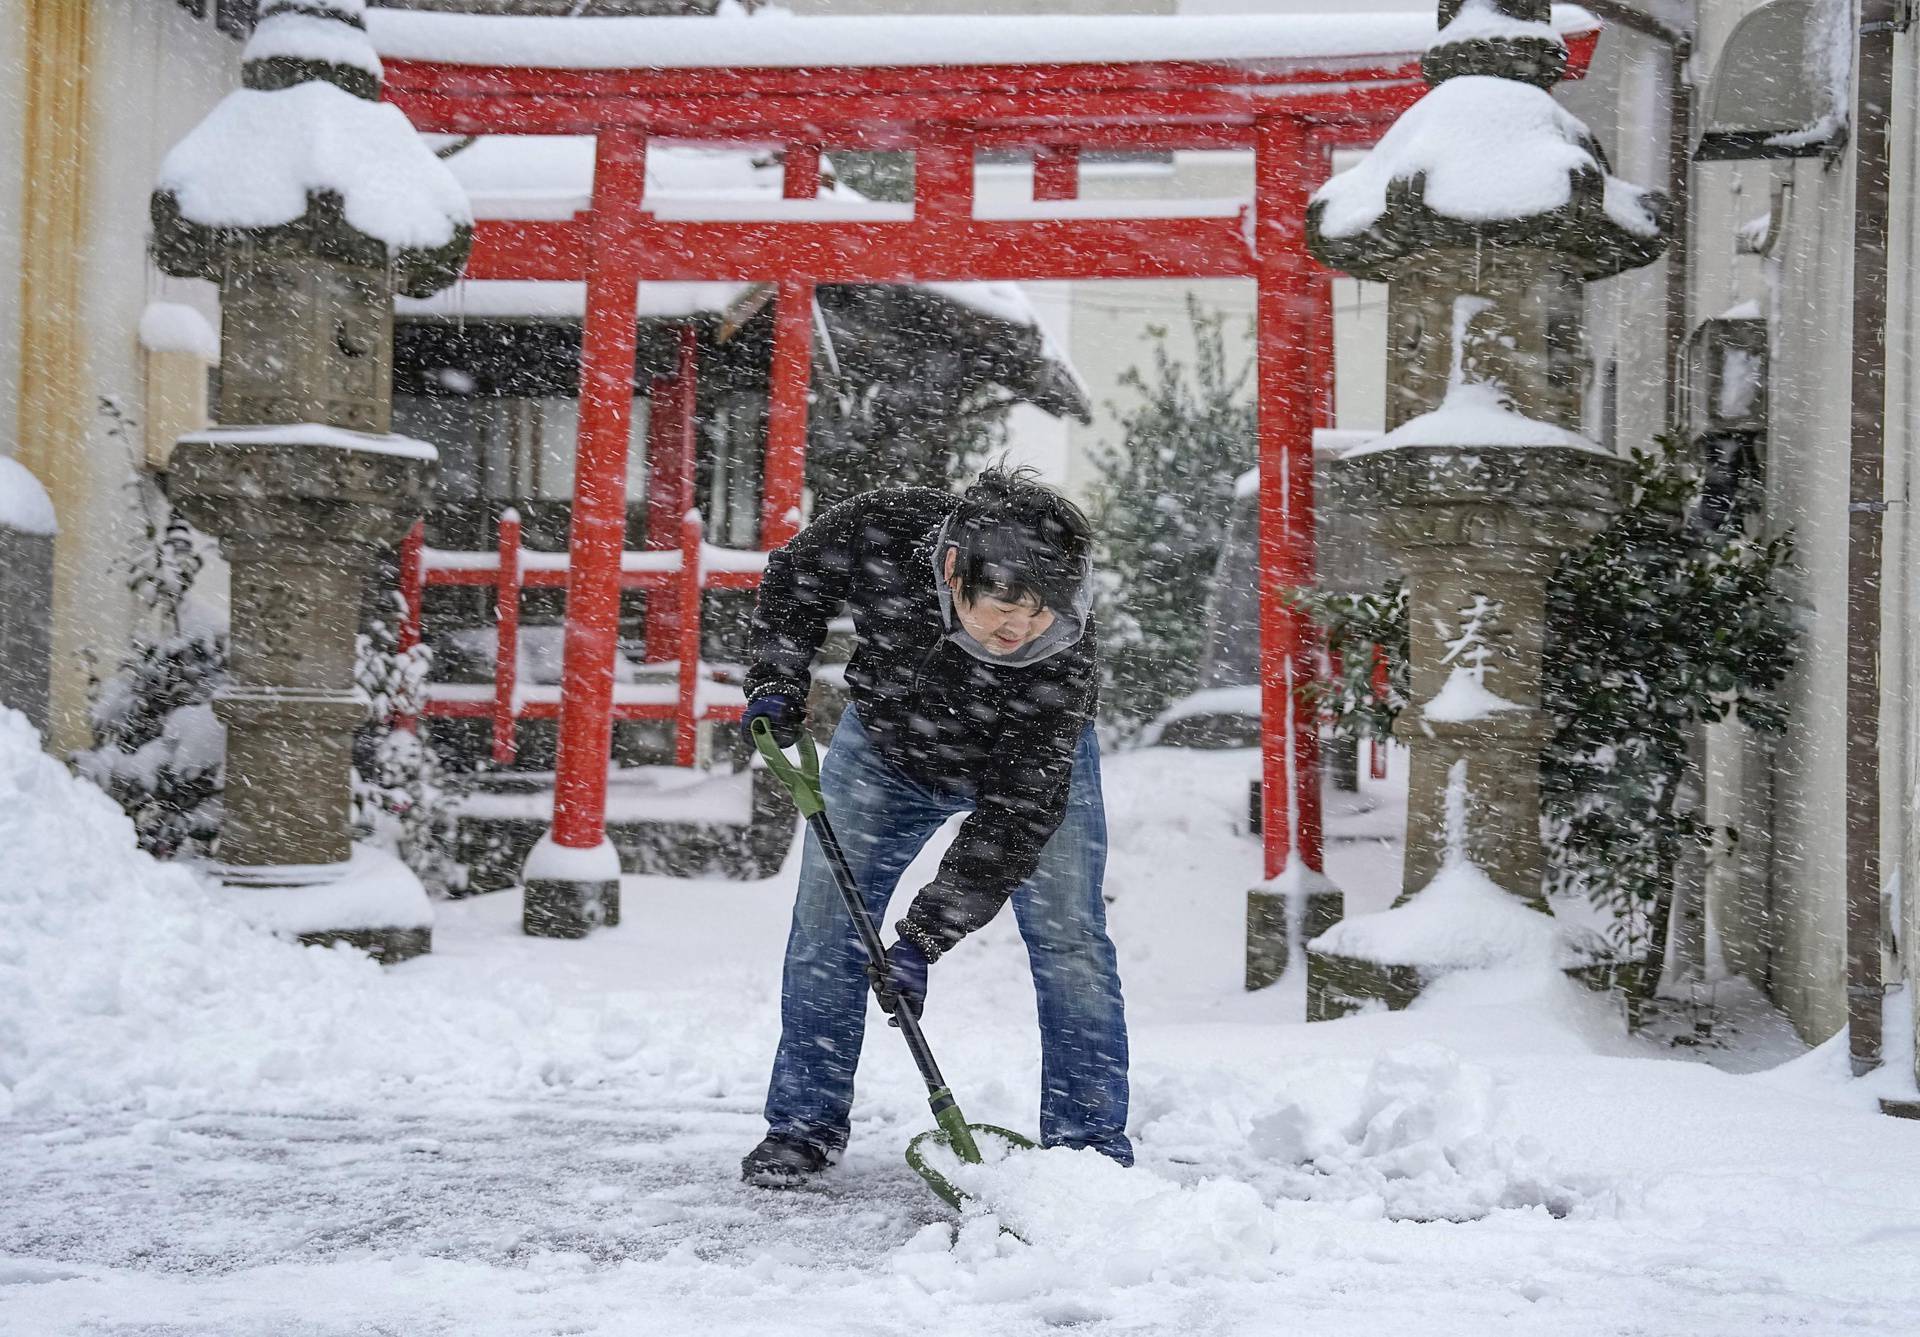 A man clears snow in front of a shrine amid heavy snowfall in Tottori